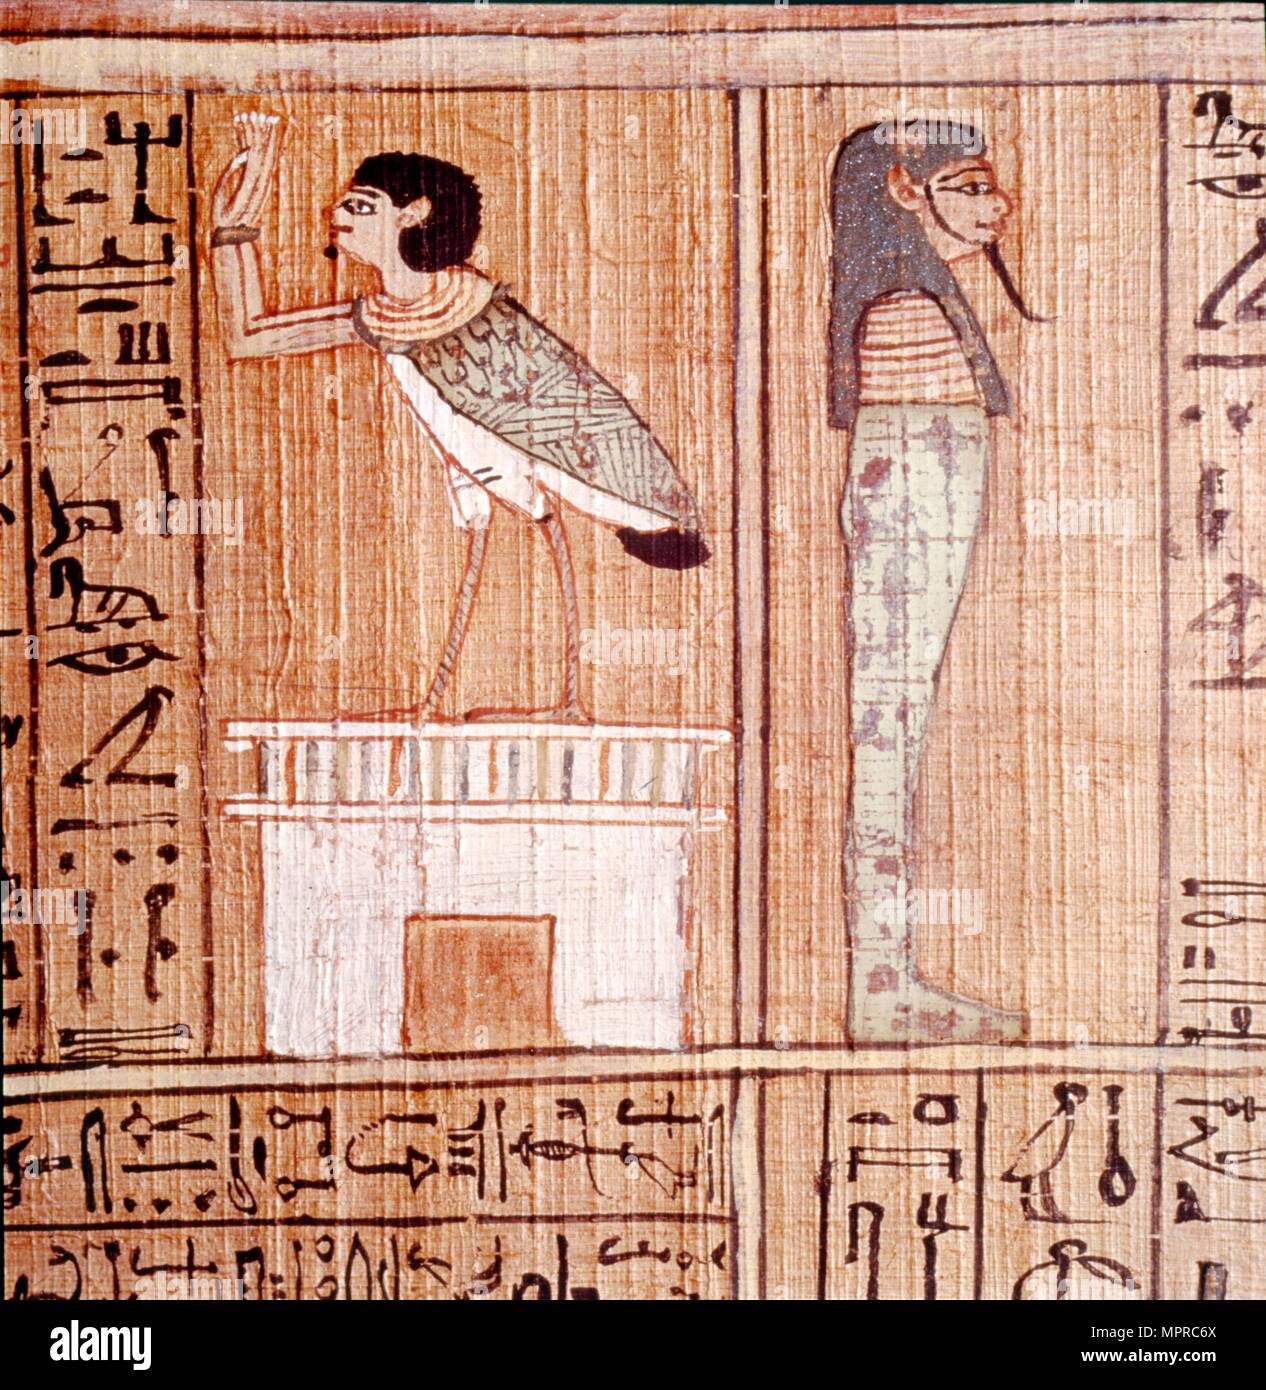 Soul-bird & Mummy, Book of the Dead, Egyptian Papyrus of Ani, Thebes, c1250BC. Artist: Unknown. Stock Photo